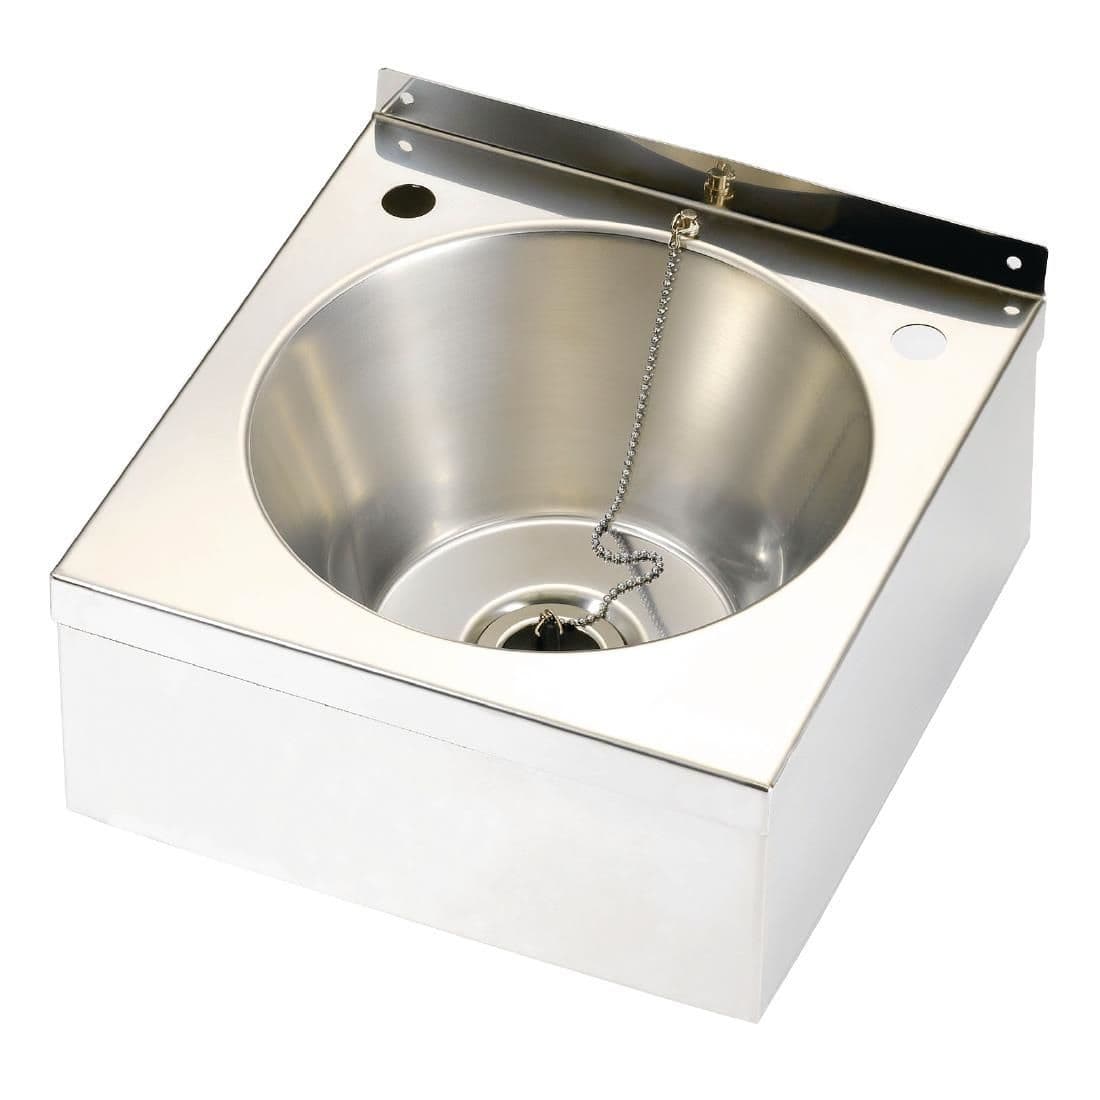 Franke Sissons Stainless Steel Wash Basin with Waste Kit 290x290x157mm JD Catering Equipment Solutions Ltd